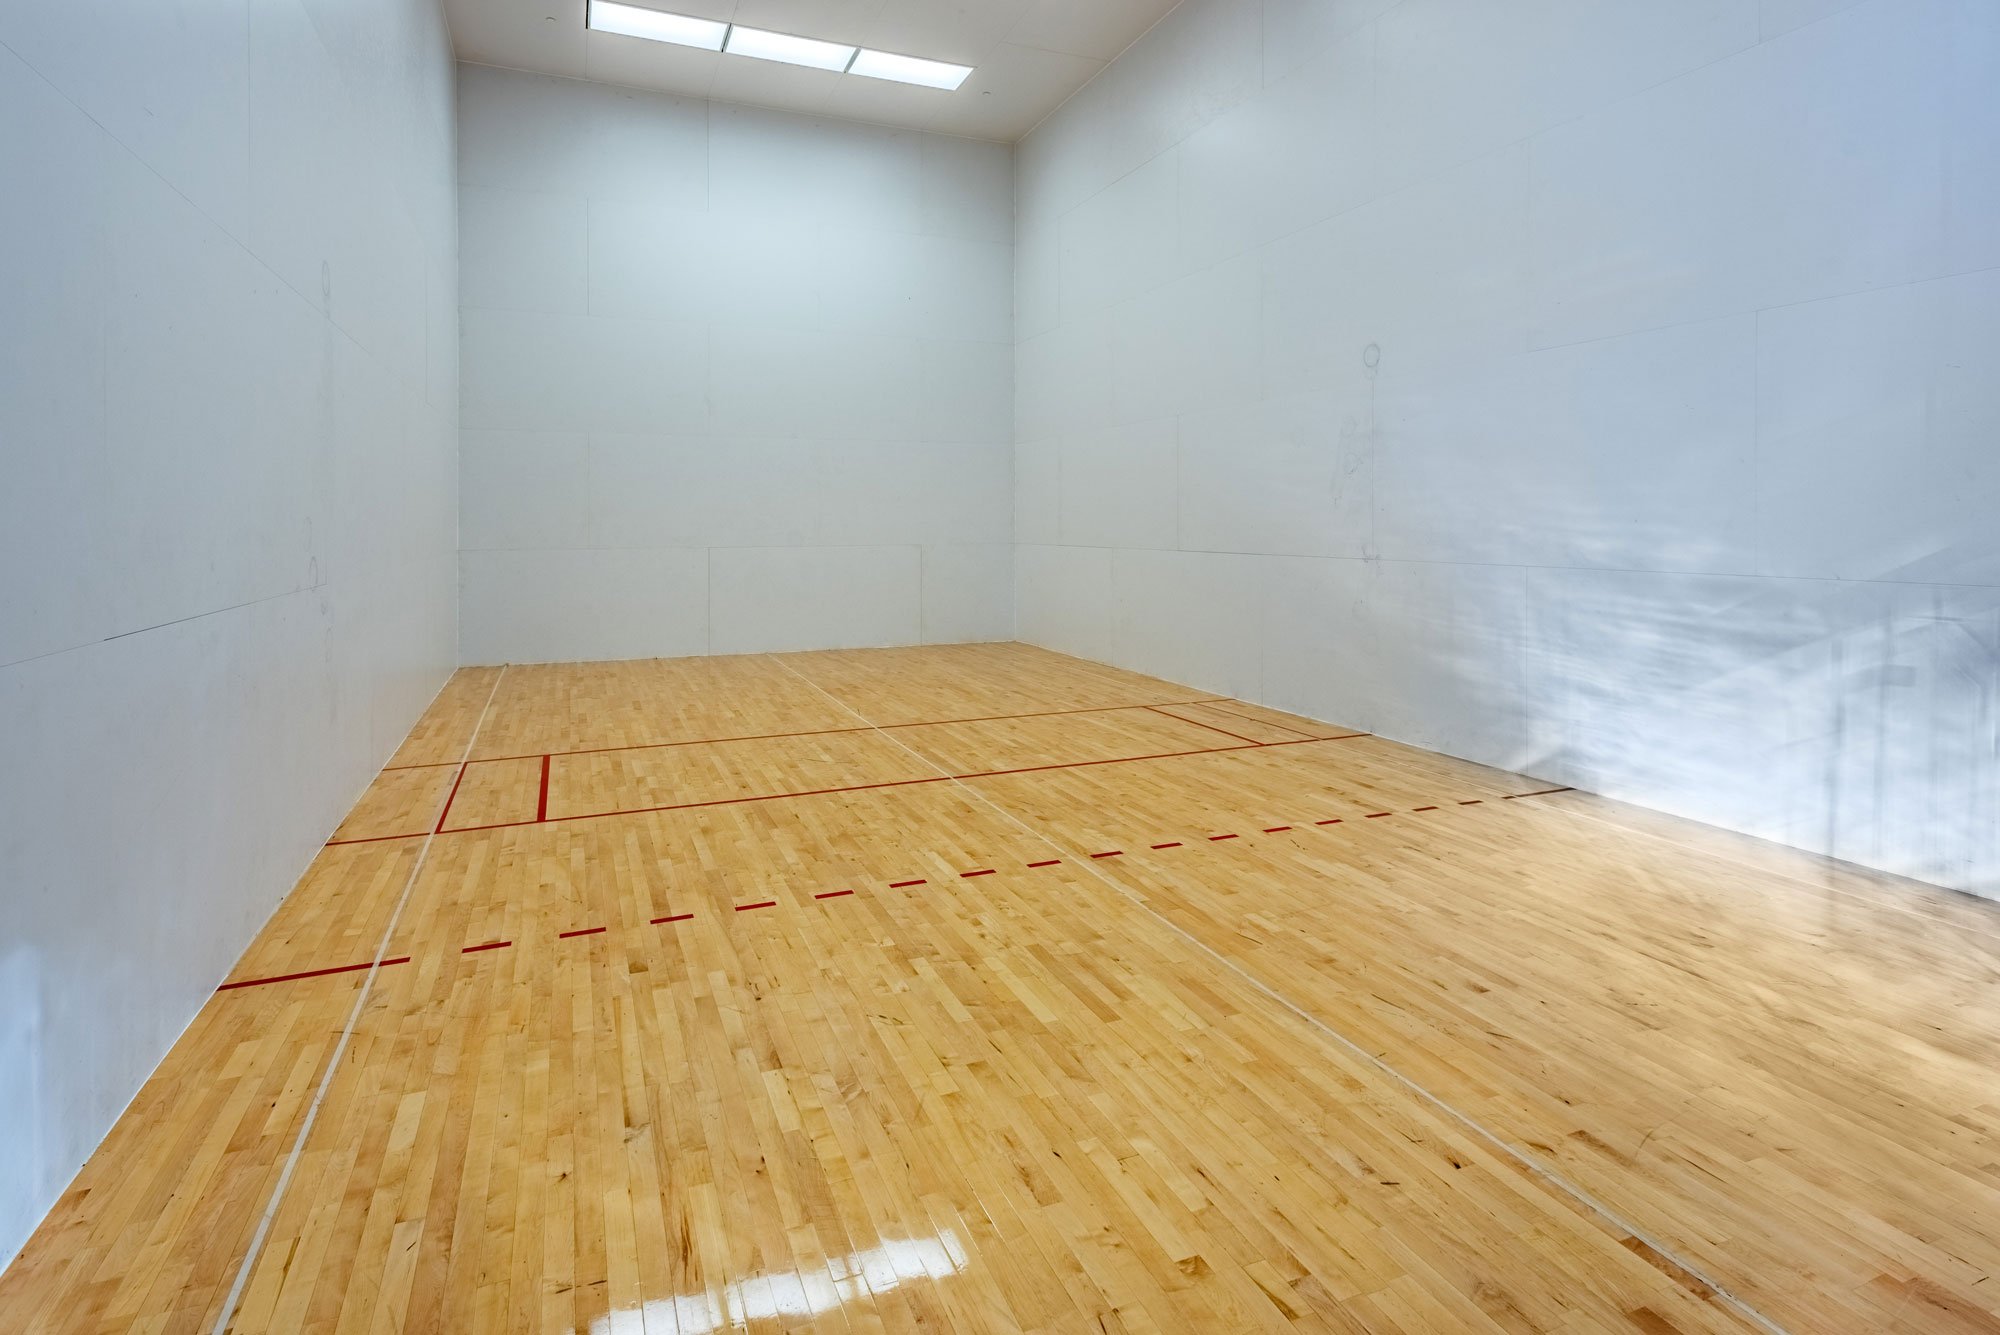 Indoor basketball and racquet ball courts